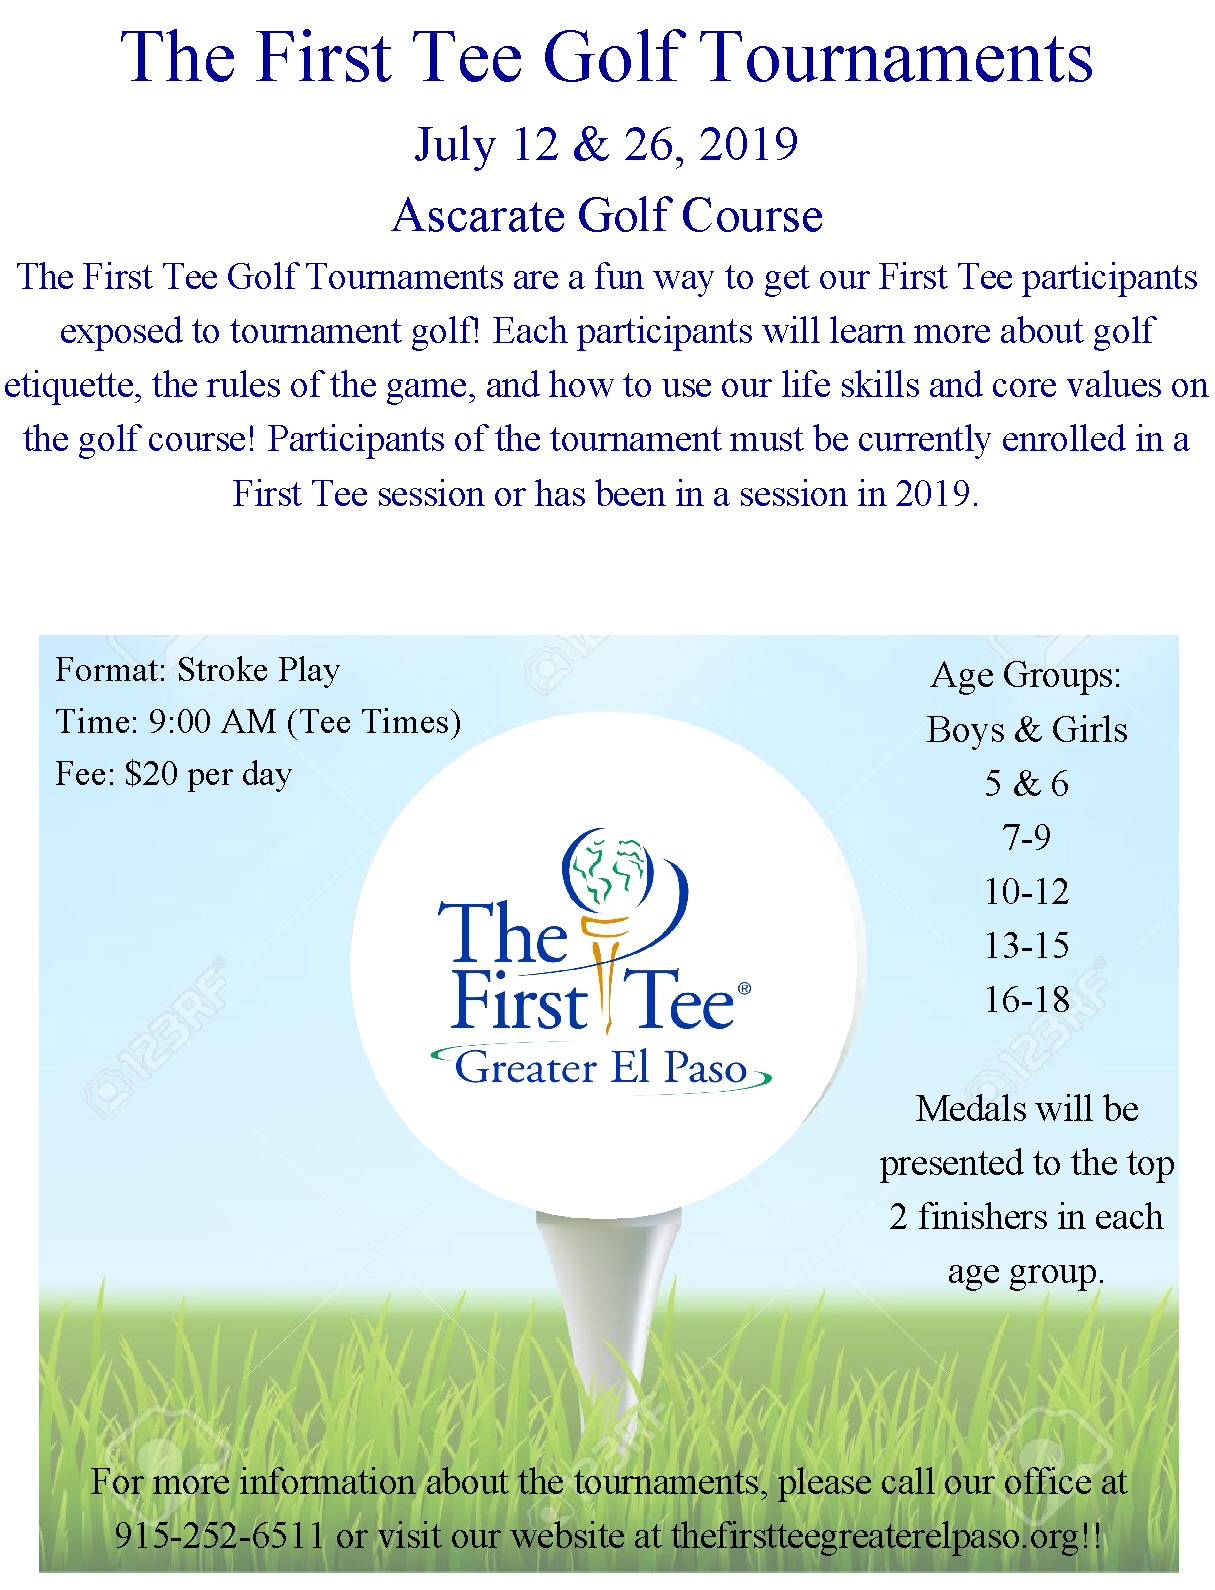 The First Tee Tournaments First Tee Greater El Paso